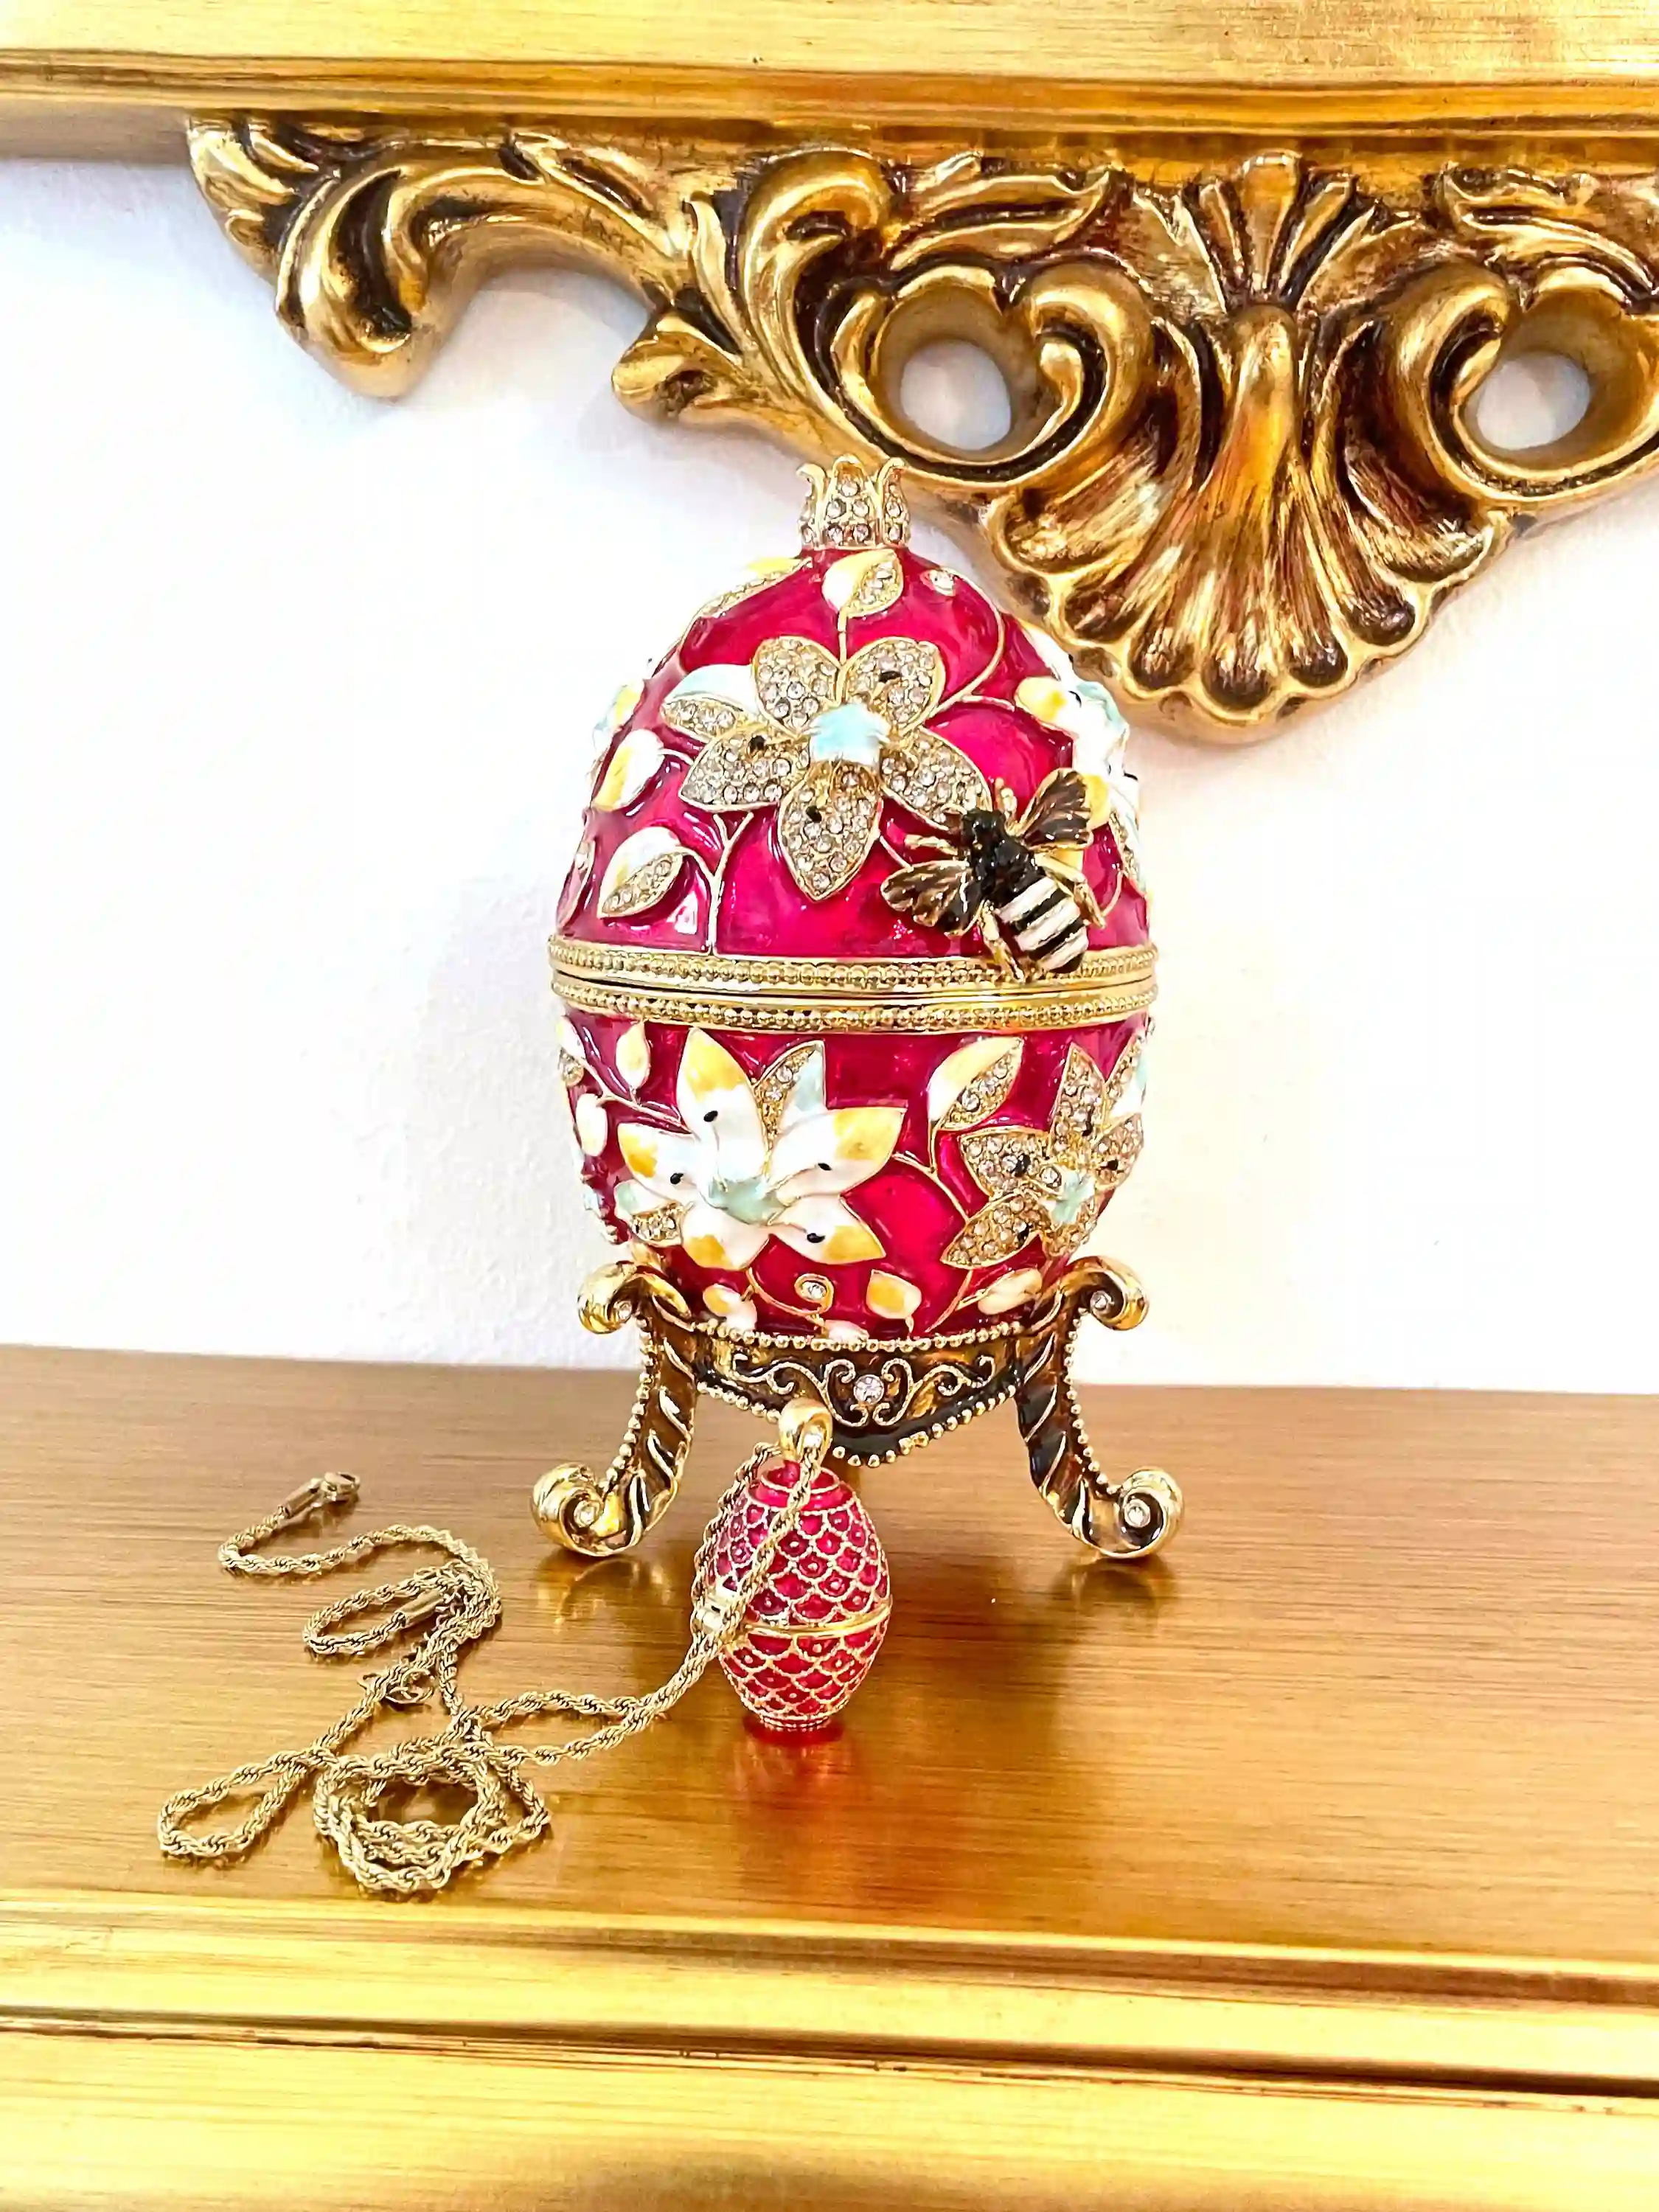 Red Faberge Egg Jewelry box Pomegranate Gift + Fabrege egg Necklace 24K GOLD HANDMADE Mothers Day gift 450 Austrian Crystals HANDSET 10CT 